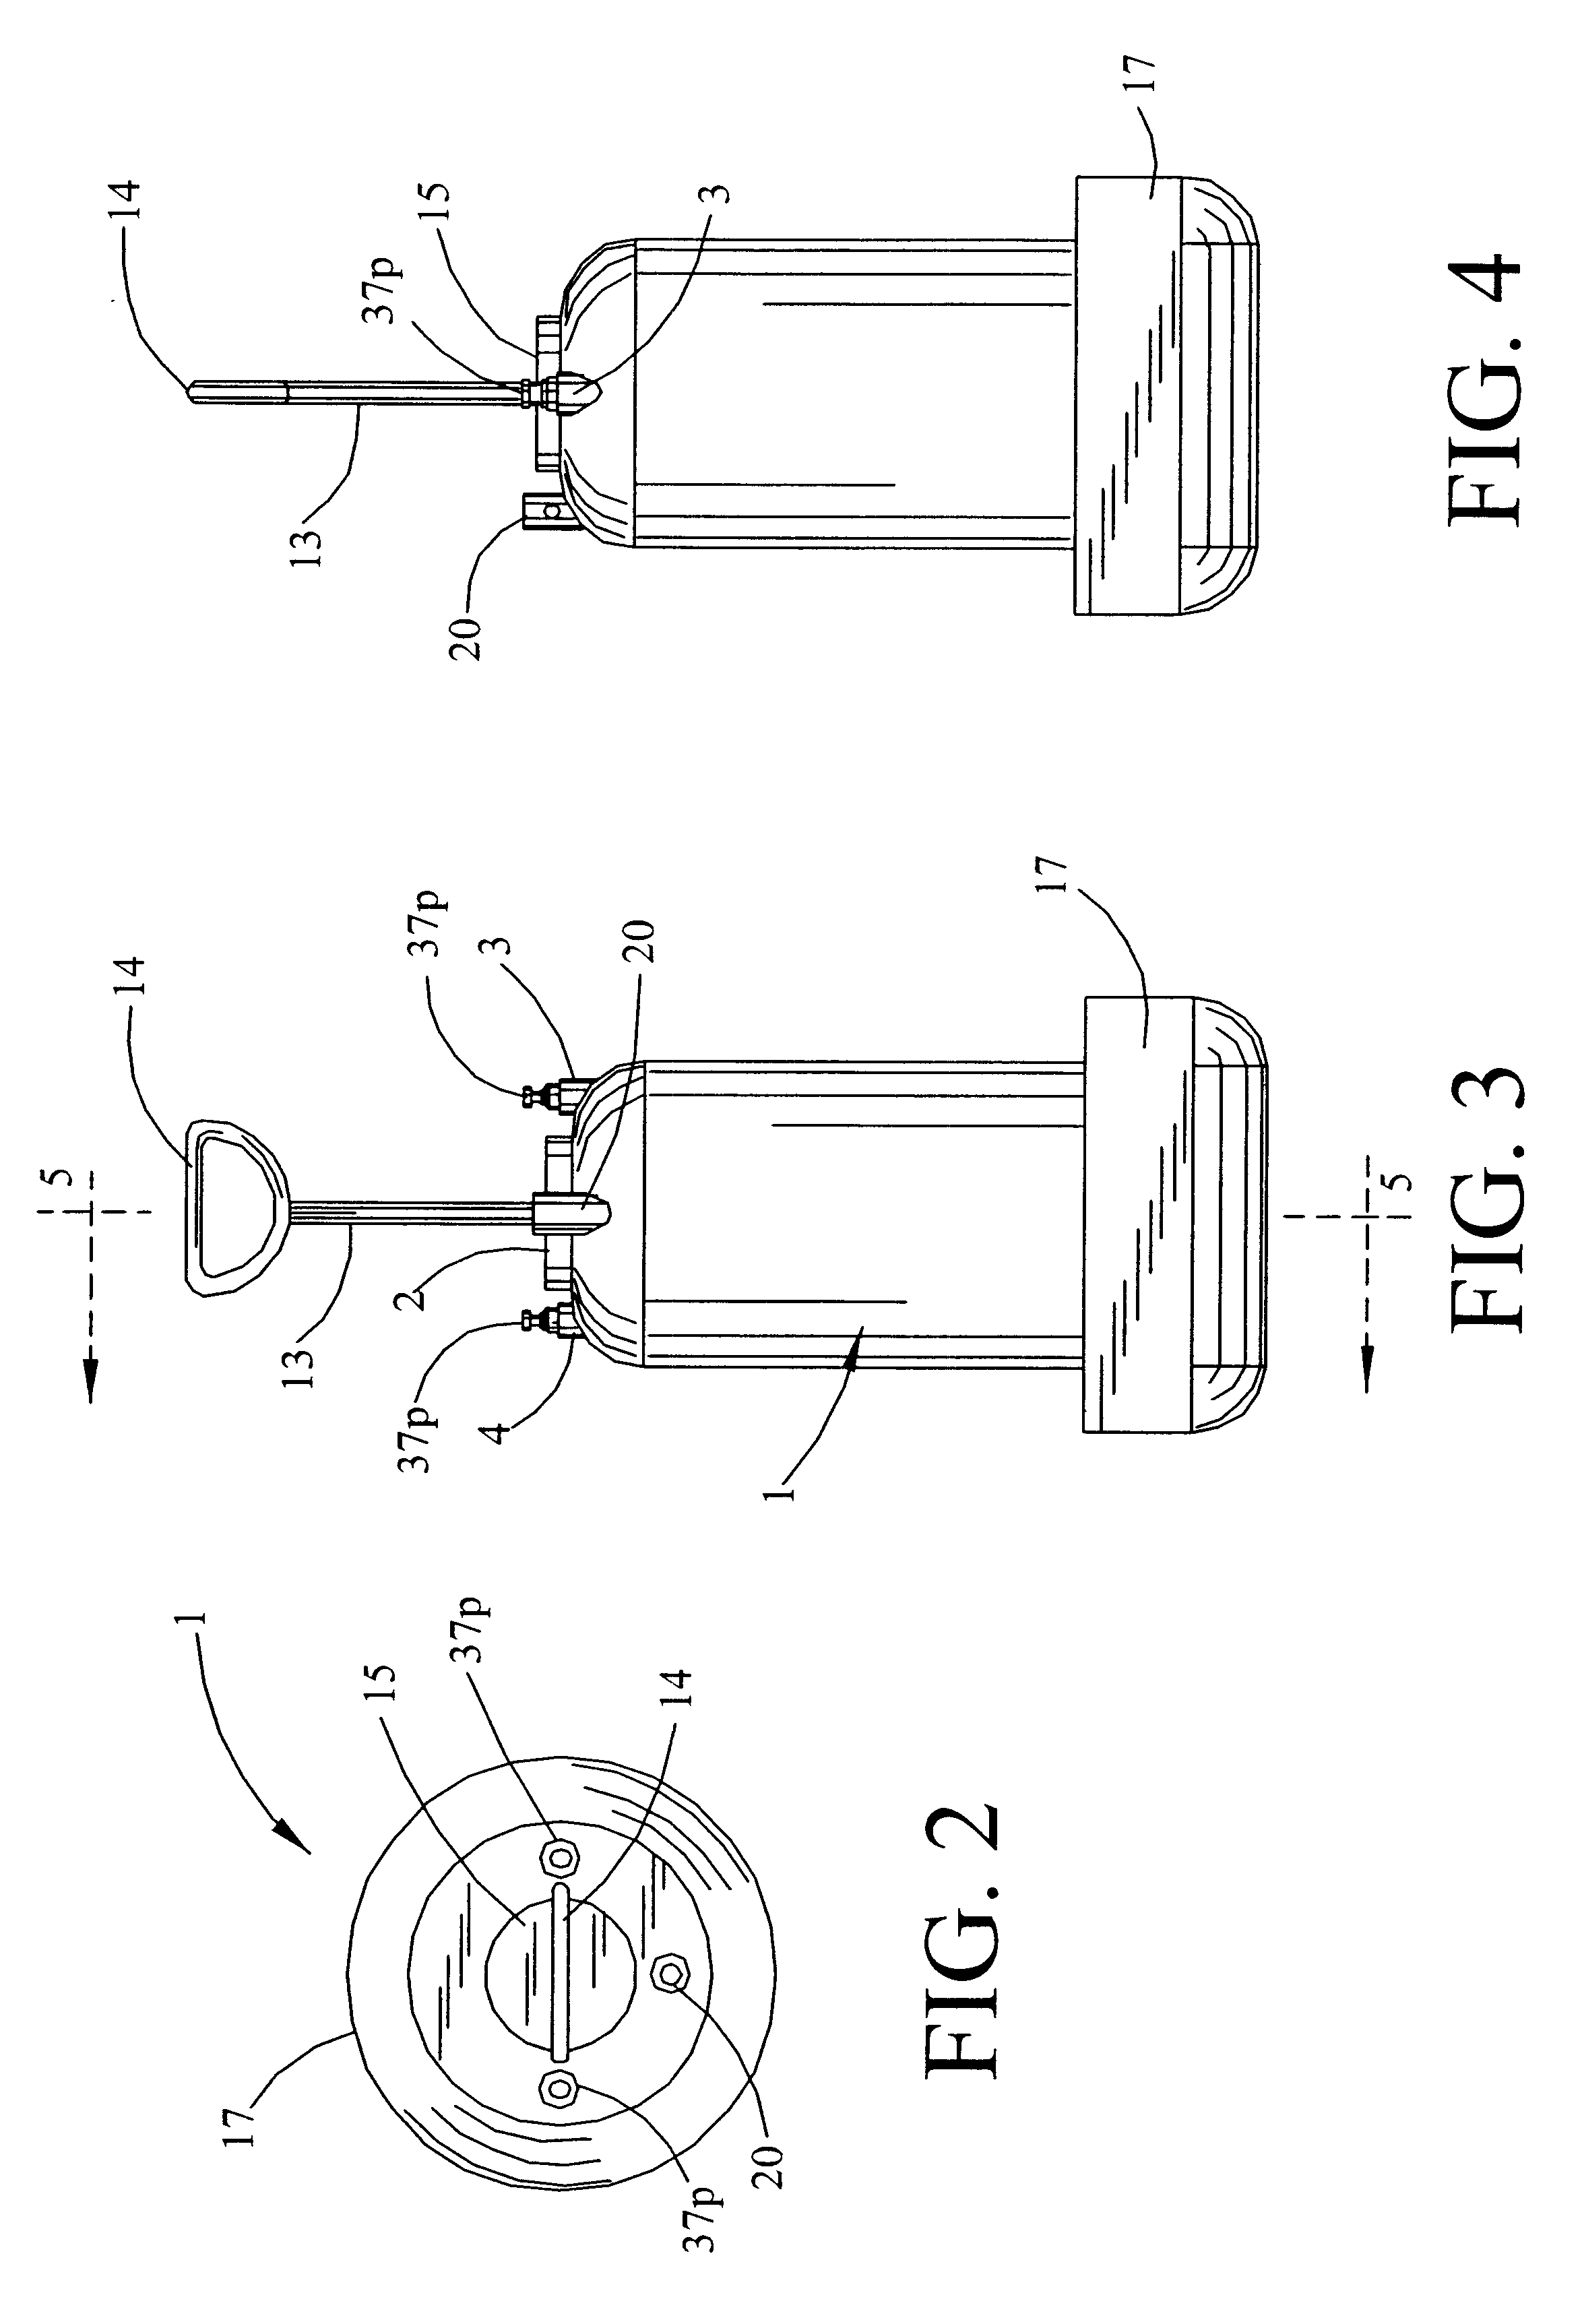 Multi-mode fluid injection system